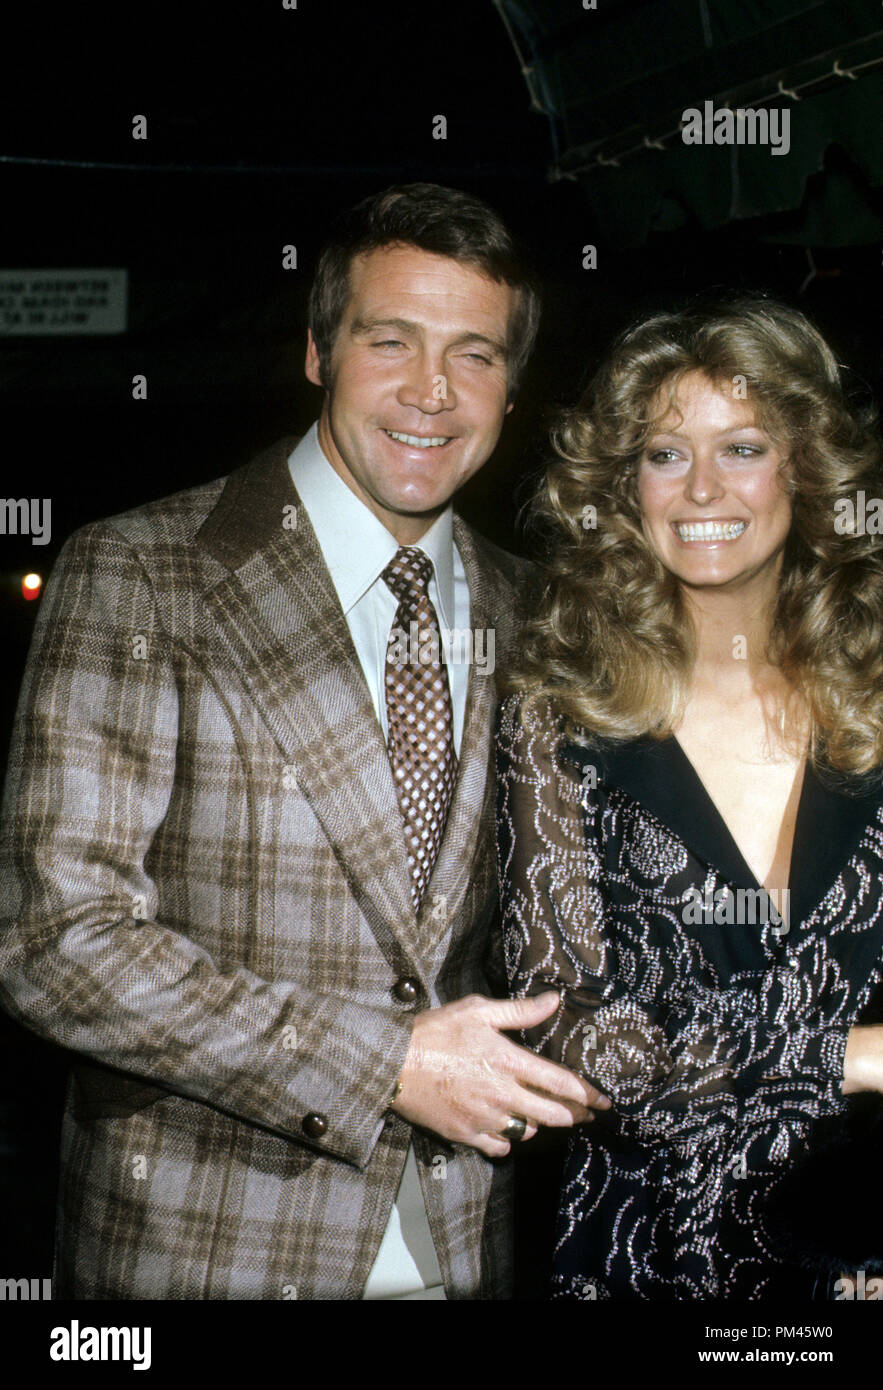 Farrah Fawcett and Lee Majors, circa 1973. File Reference #1044 003THA ©  JRC /The Hollywood Archive - All Rights Reserved Stock Photo - Alamy